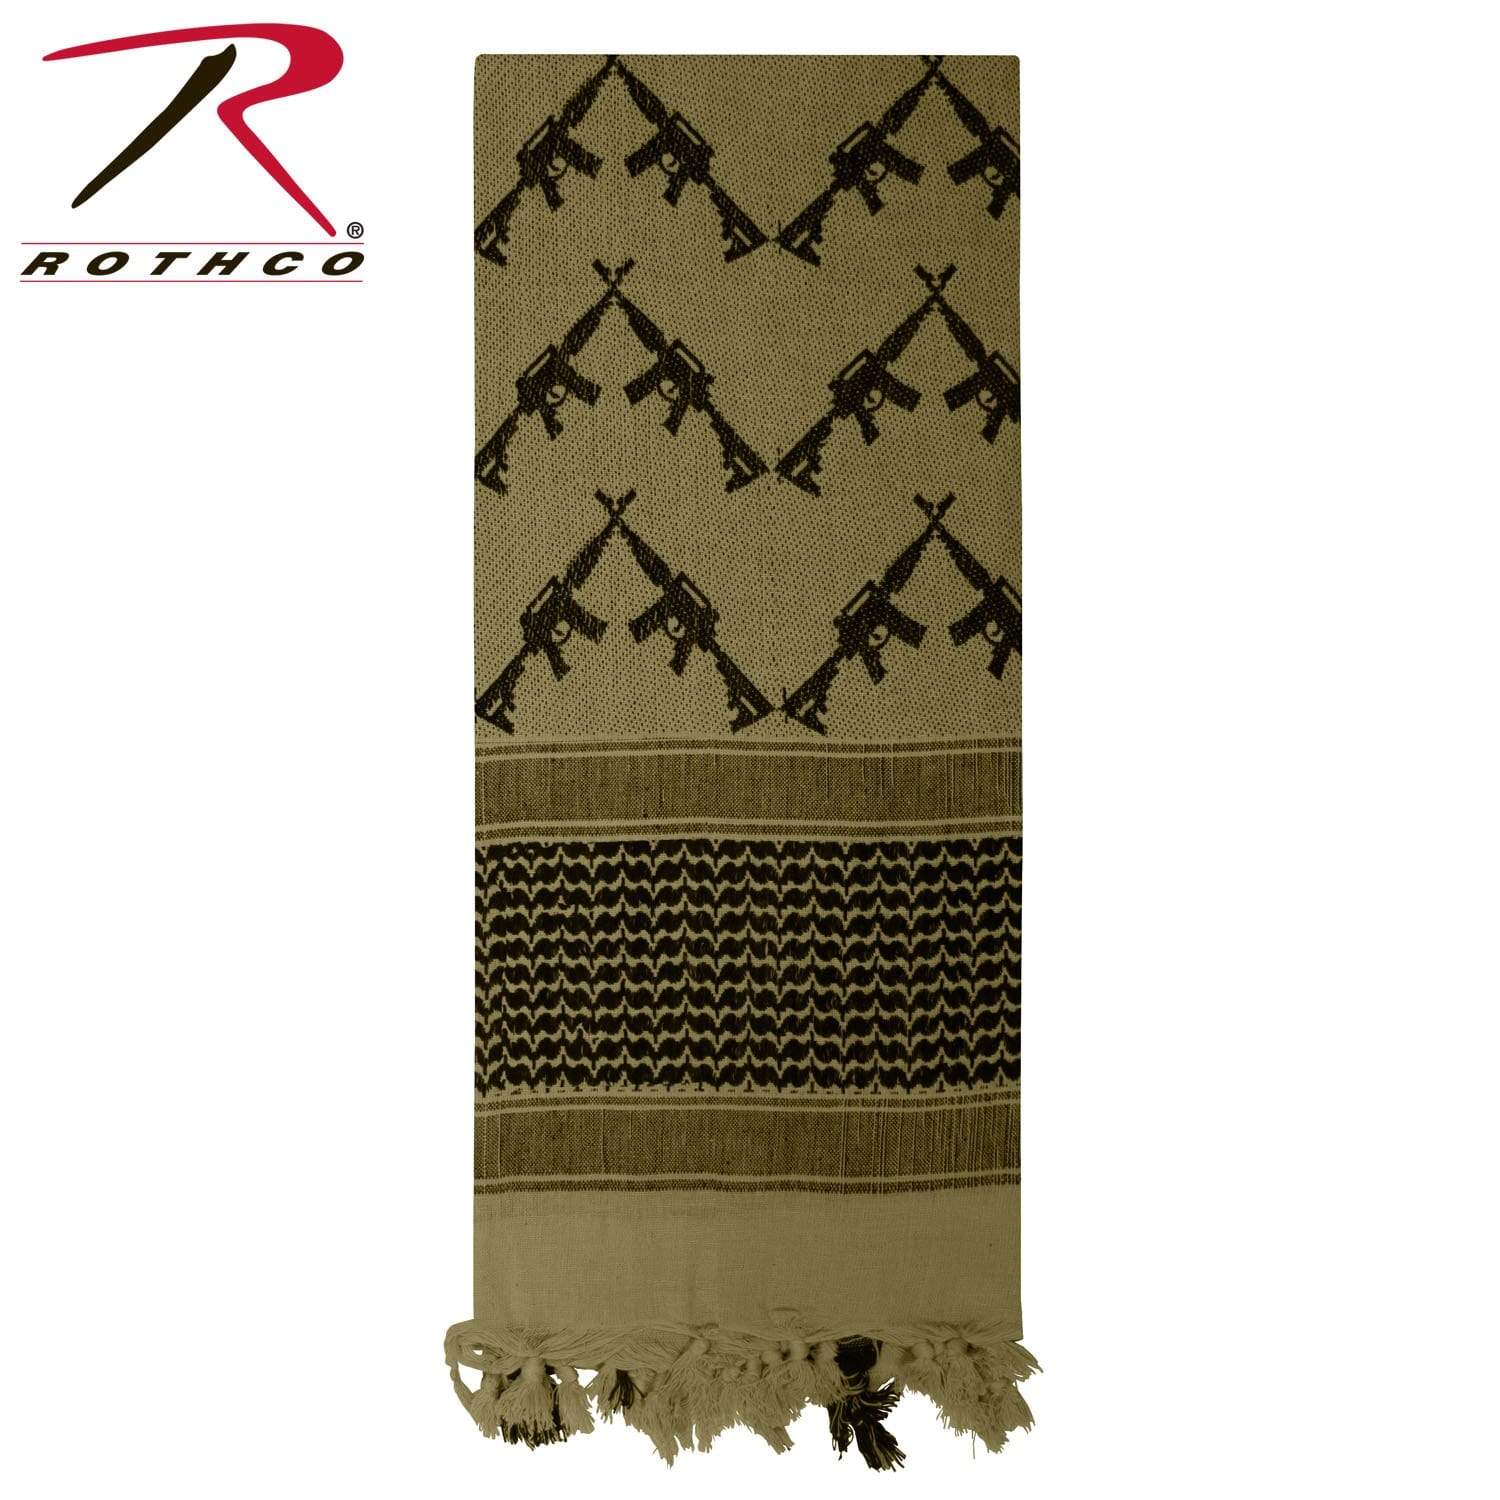 Rothco Crossed Rifles Shemagh Tactical Desert Keffiyeh Scarf - Olive Drab - Eminent Paintball And Airsoft